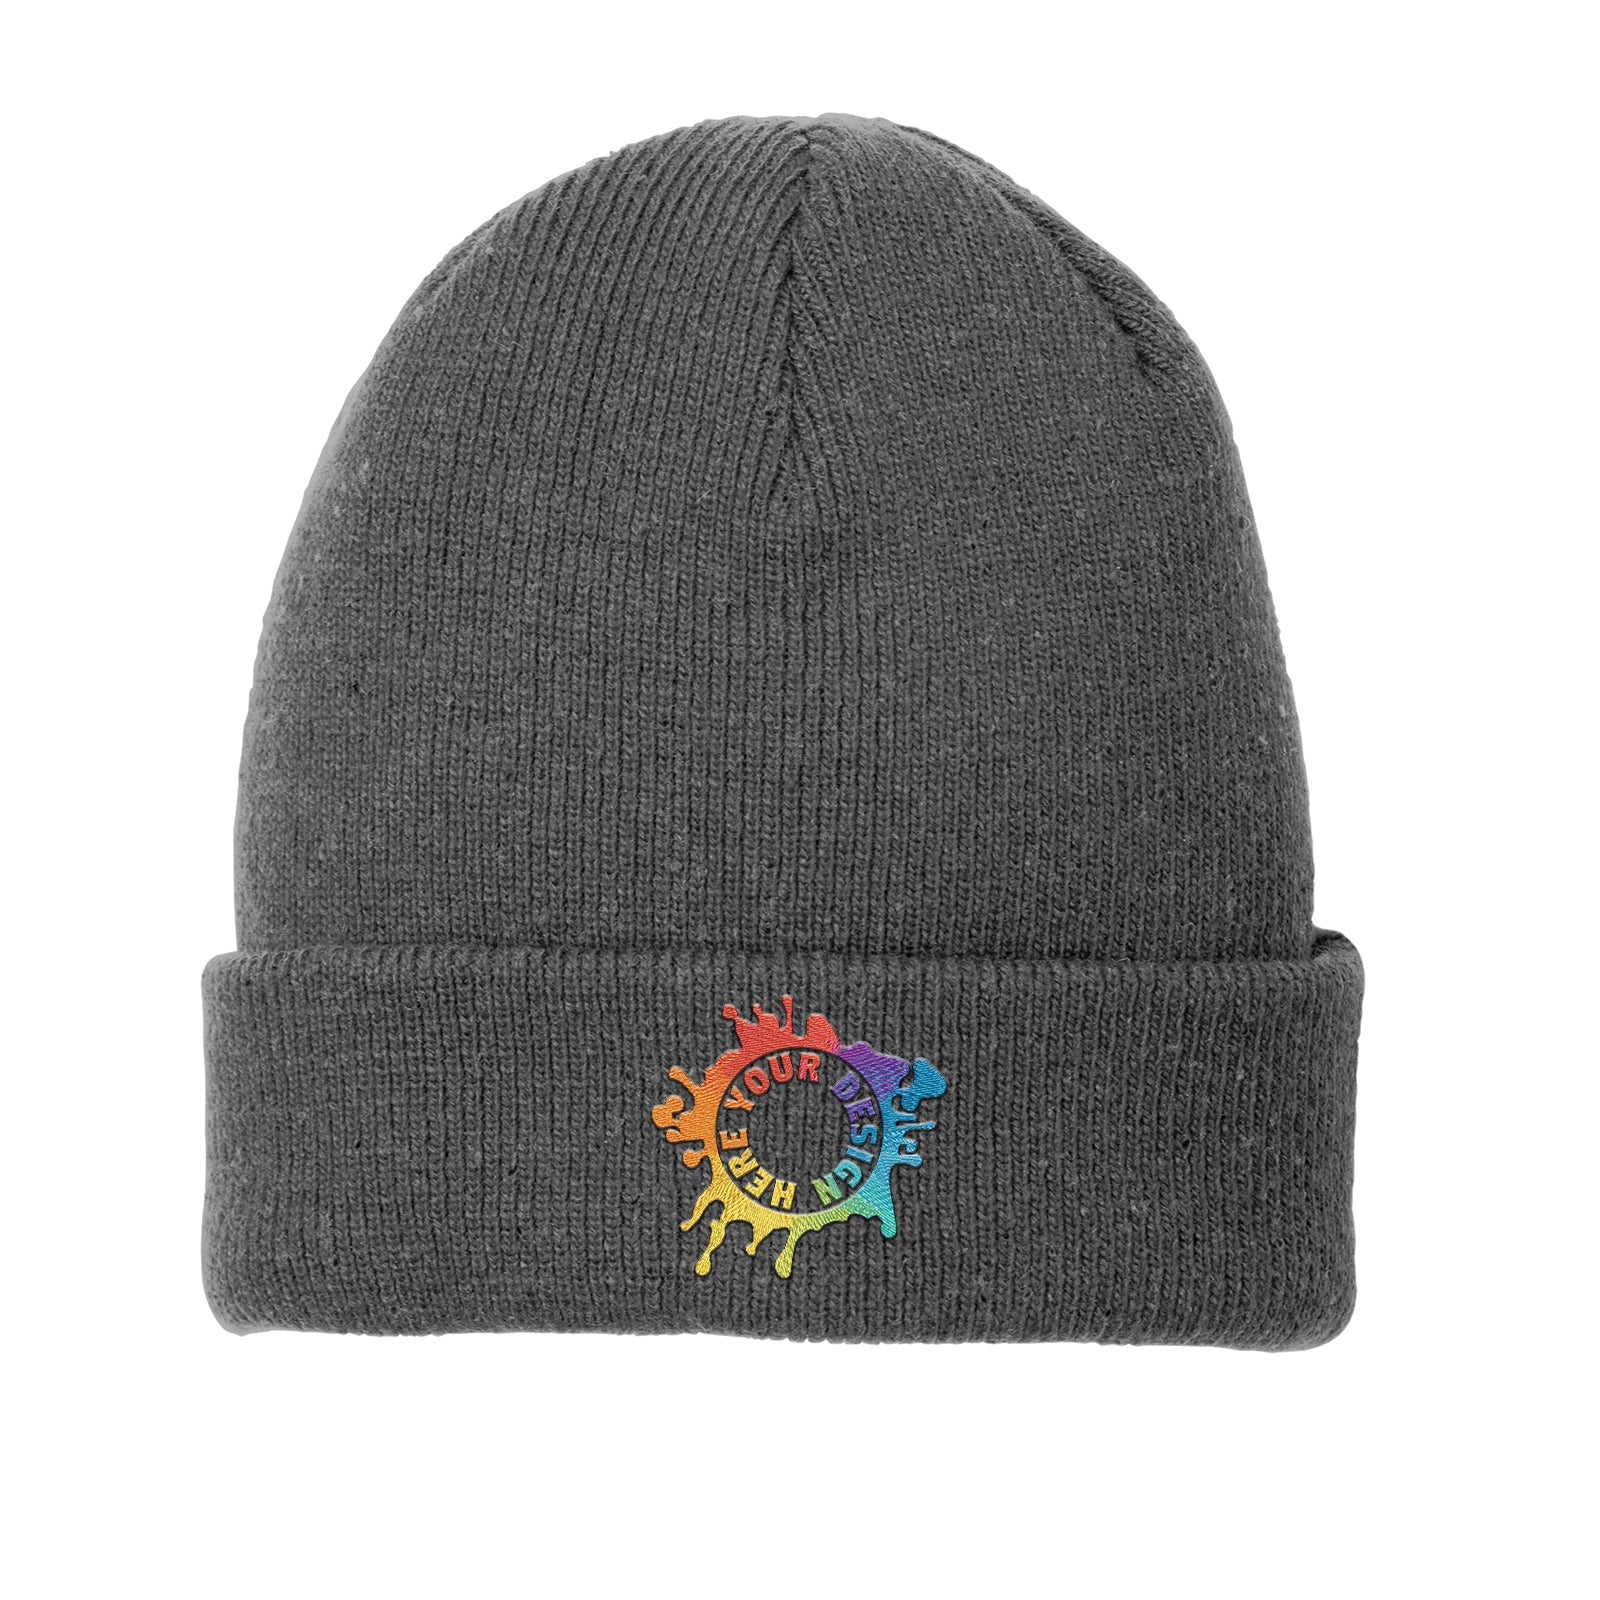 New Era ® Speckled Beanie Embroidery - Mato & Hash